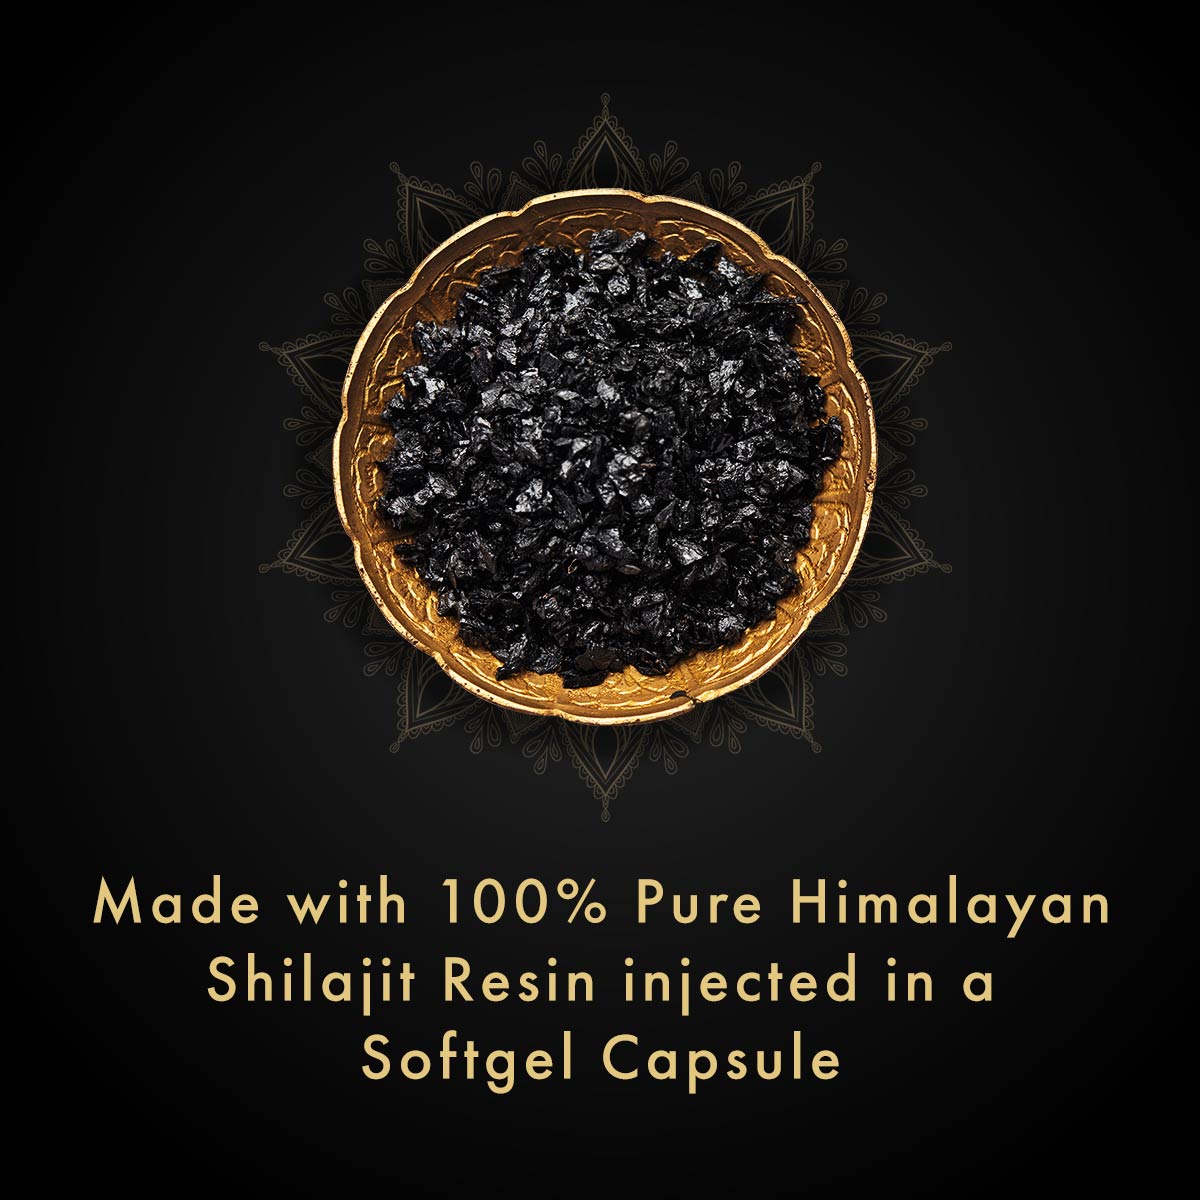 New Honeymoon Pack: With the Power of 100% Himalayan Shilajit